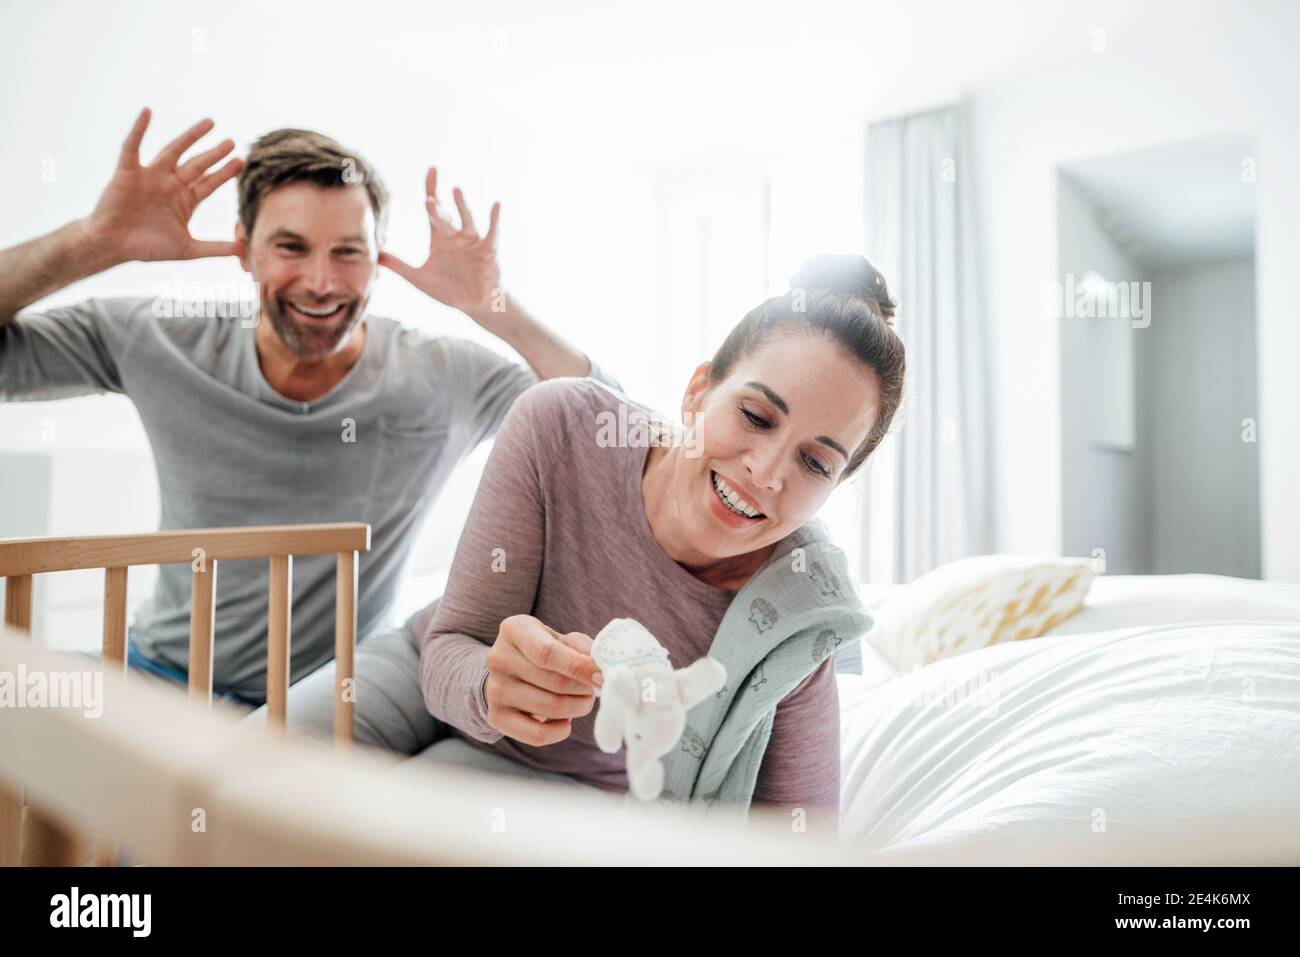 Playful mature couple sitting by crib on bed at home Stock Photo